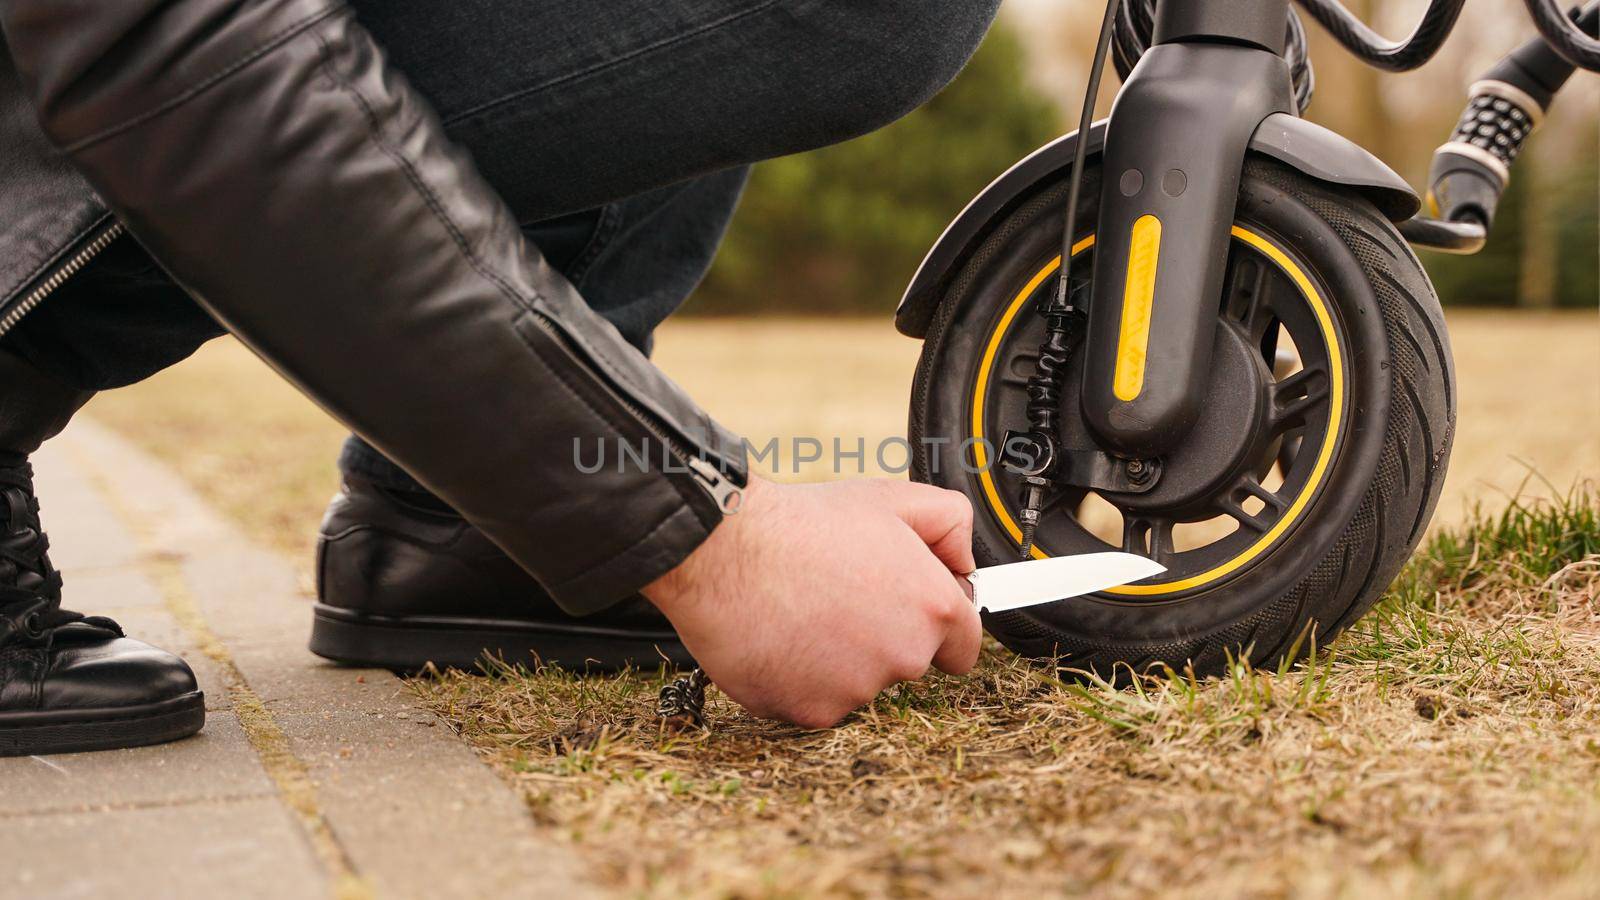 A man's hand is cutting the tire of an electric scooter with a knife. Crime concept.